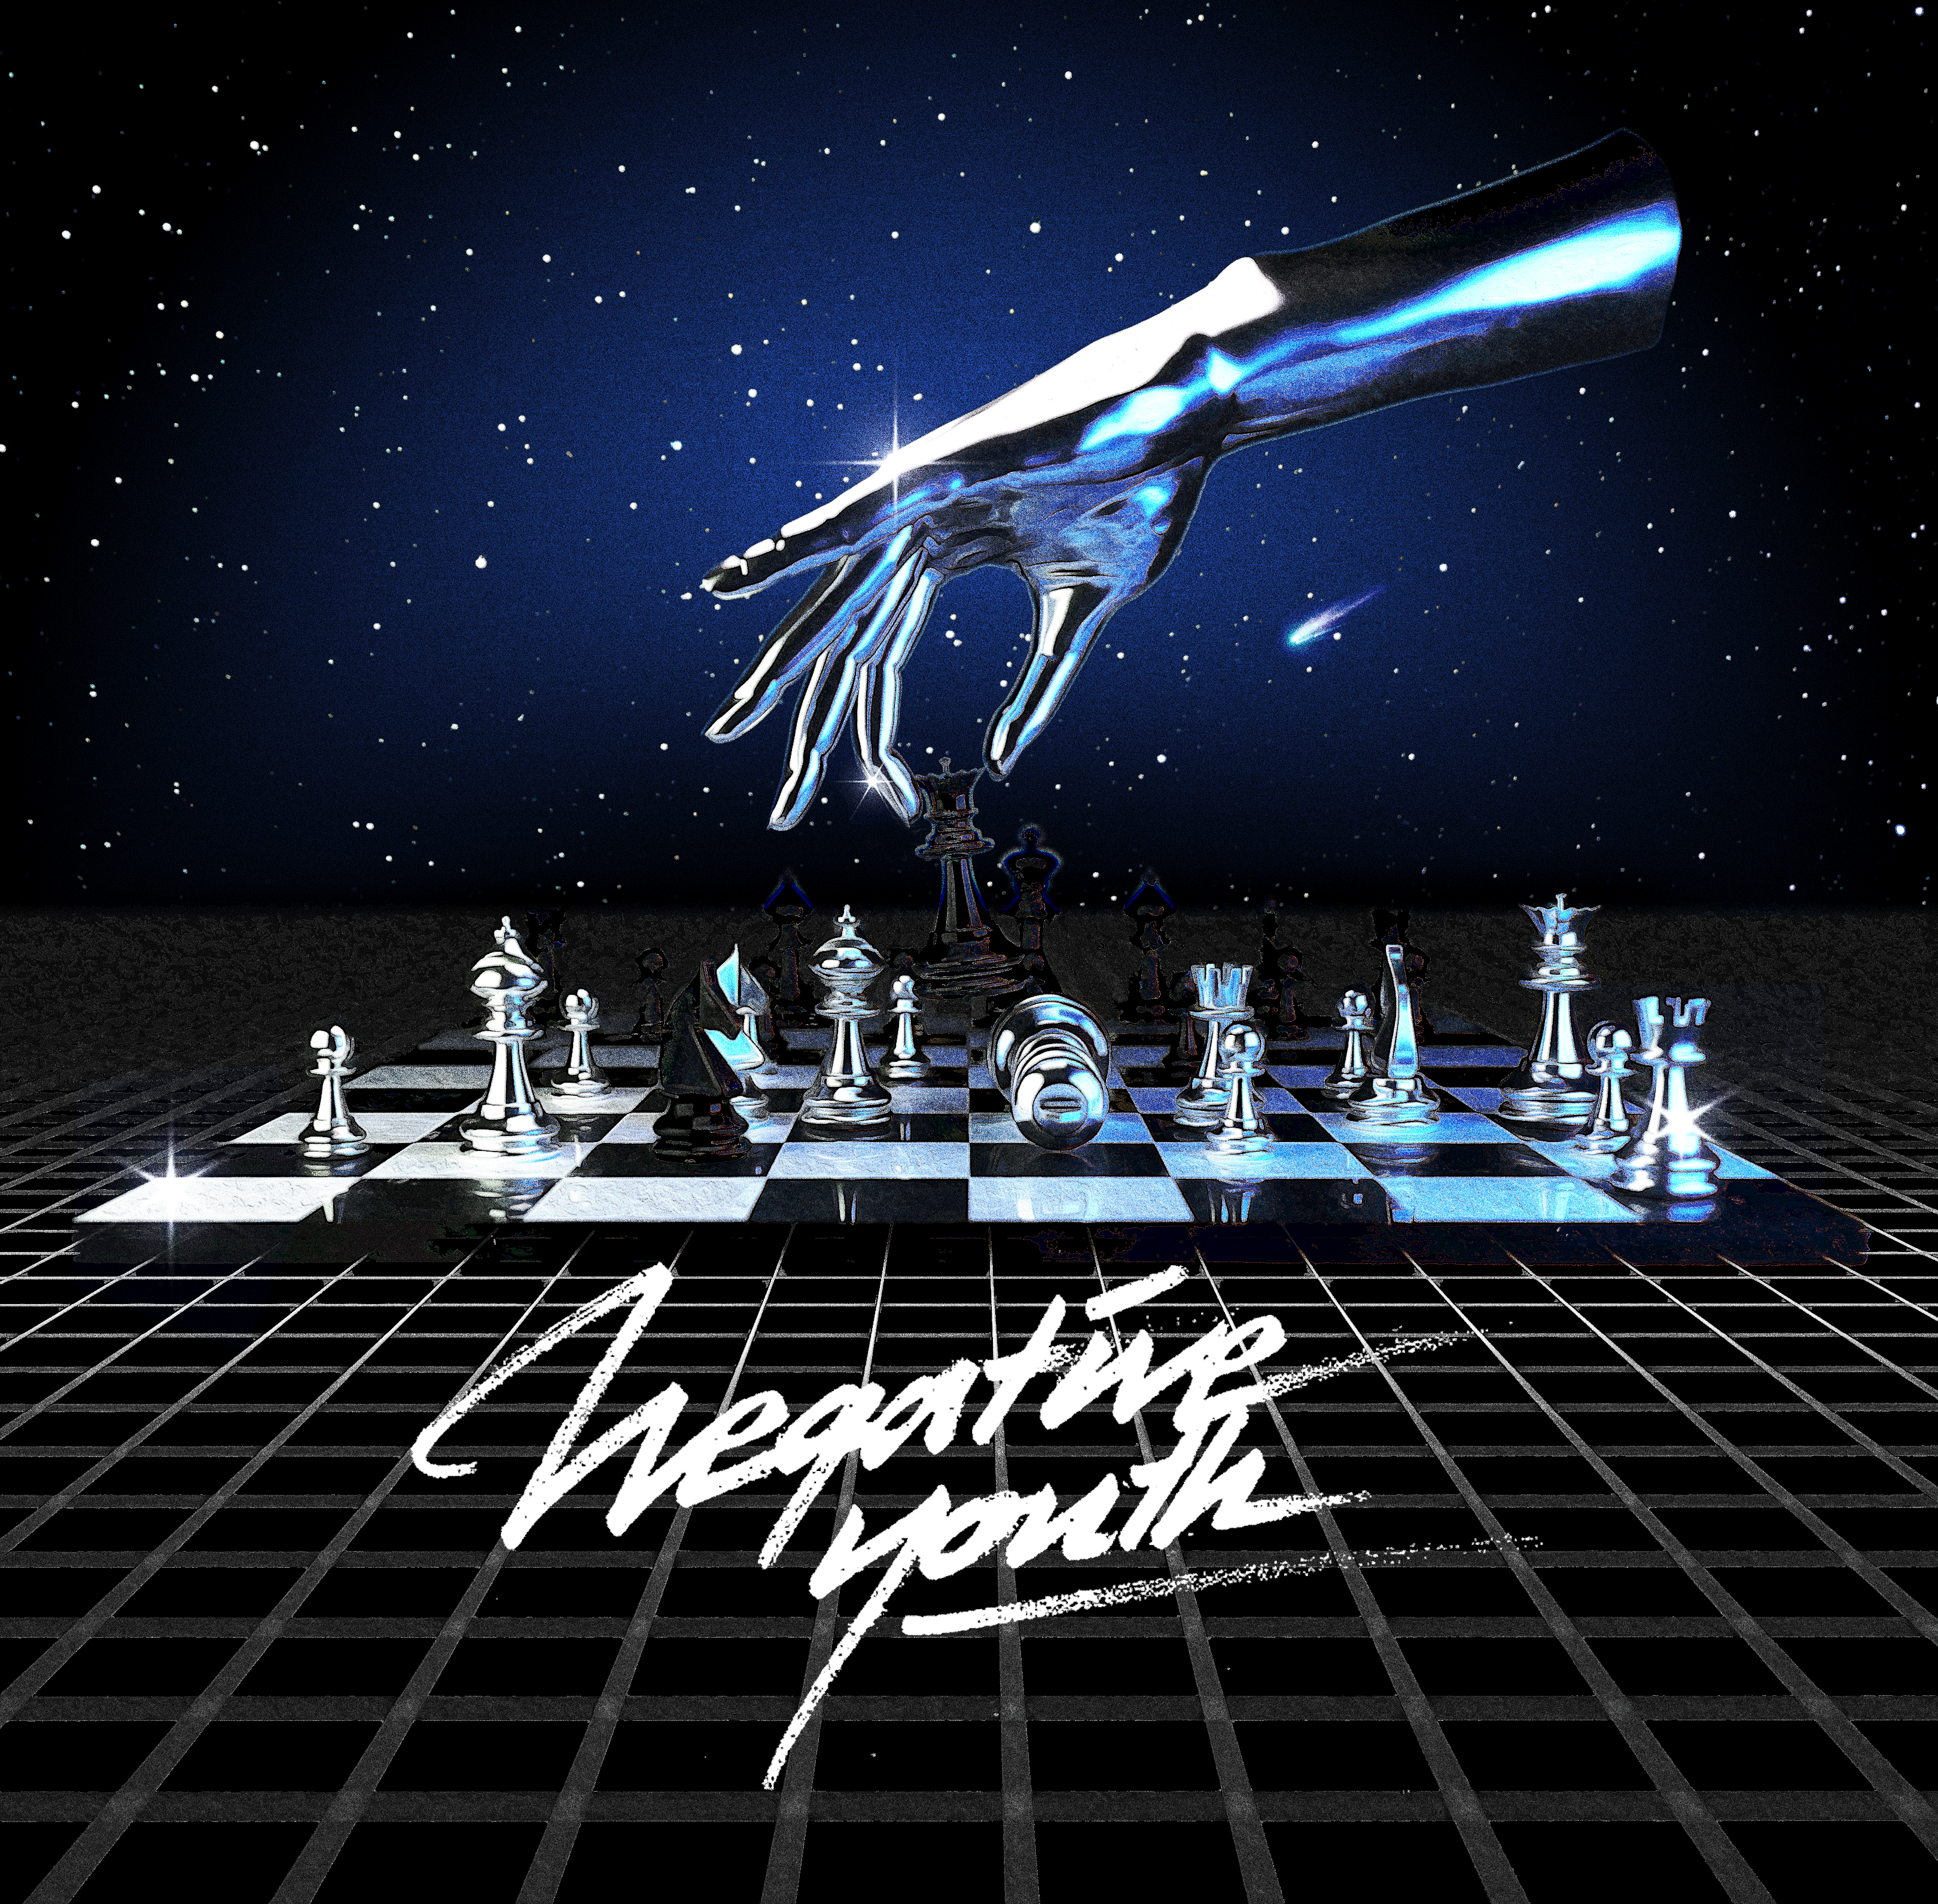 Negative Youth 80's chess